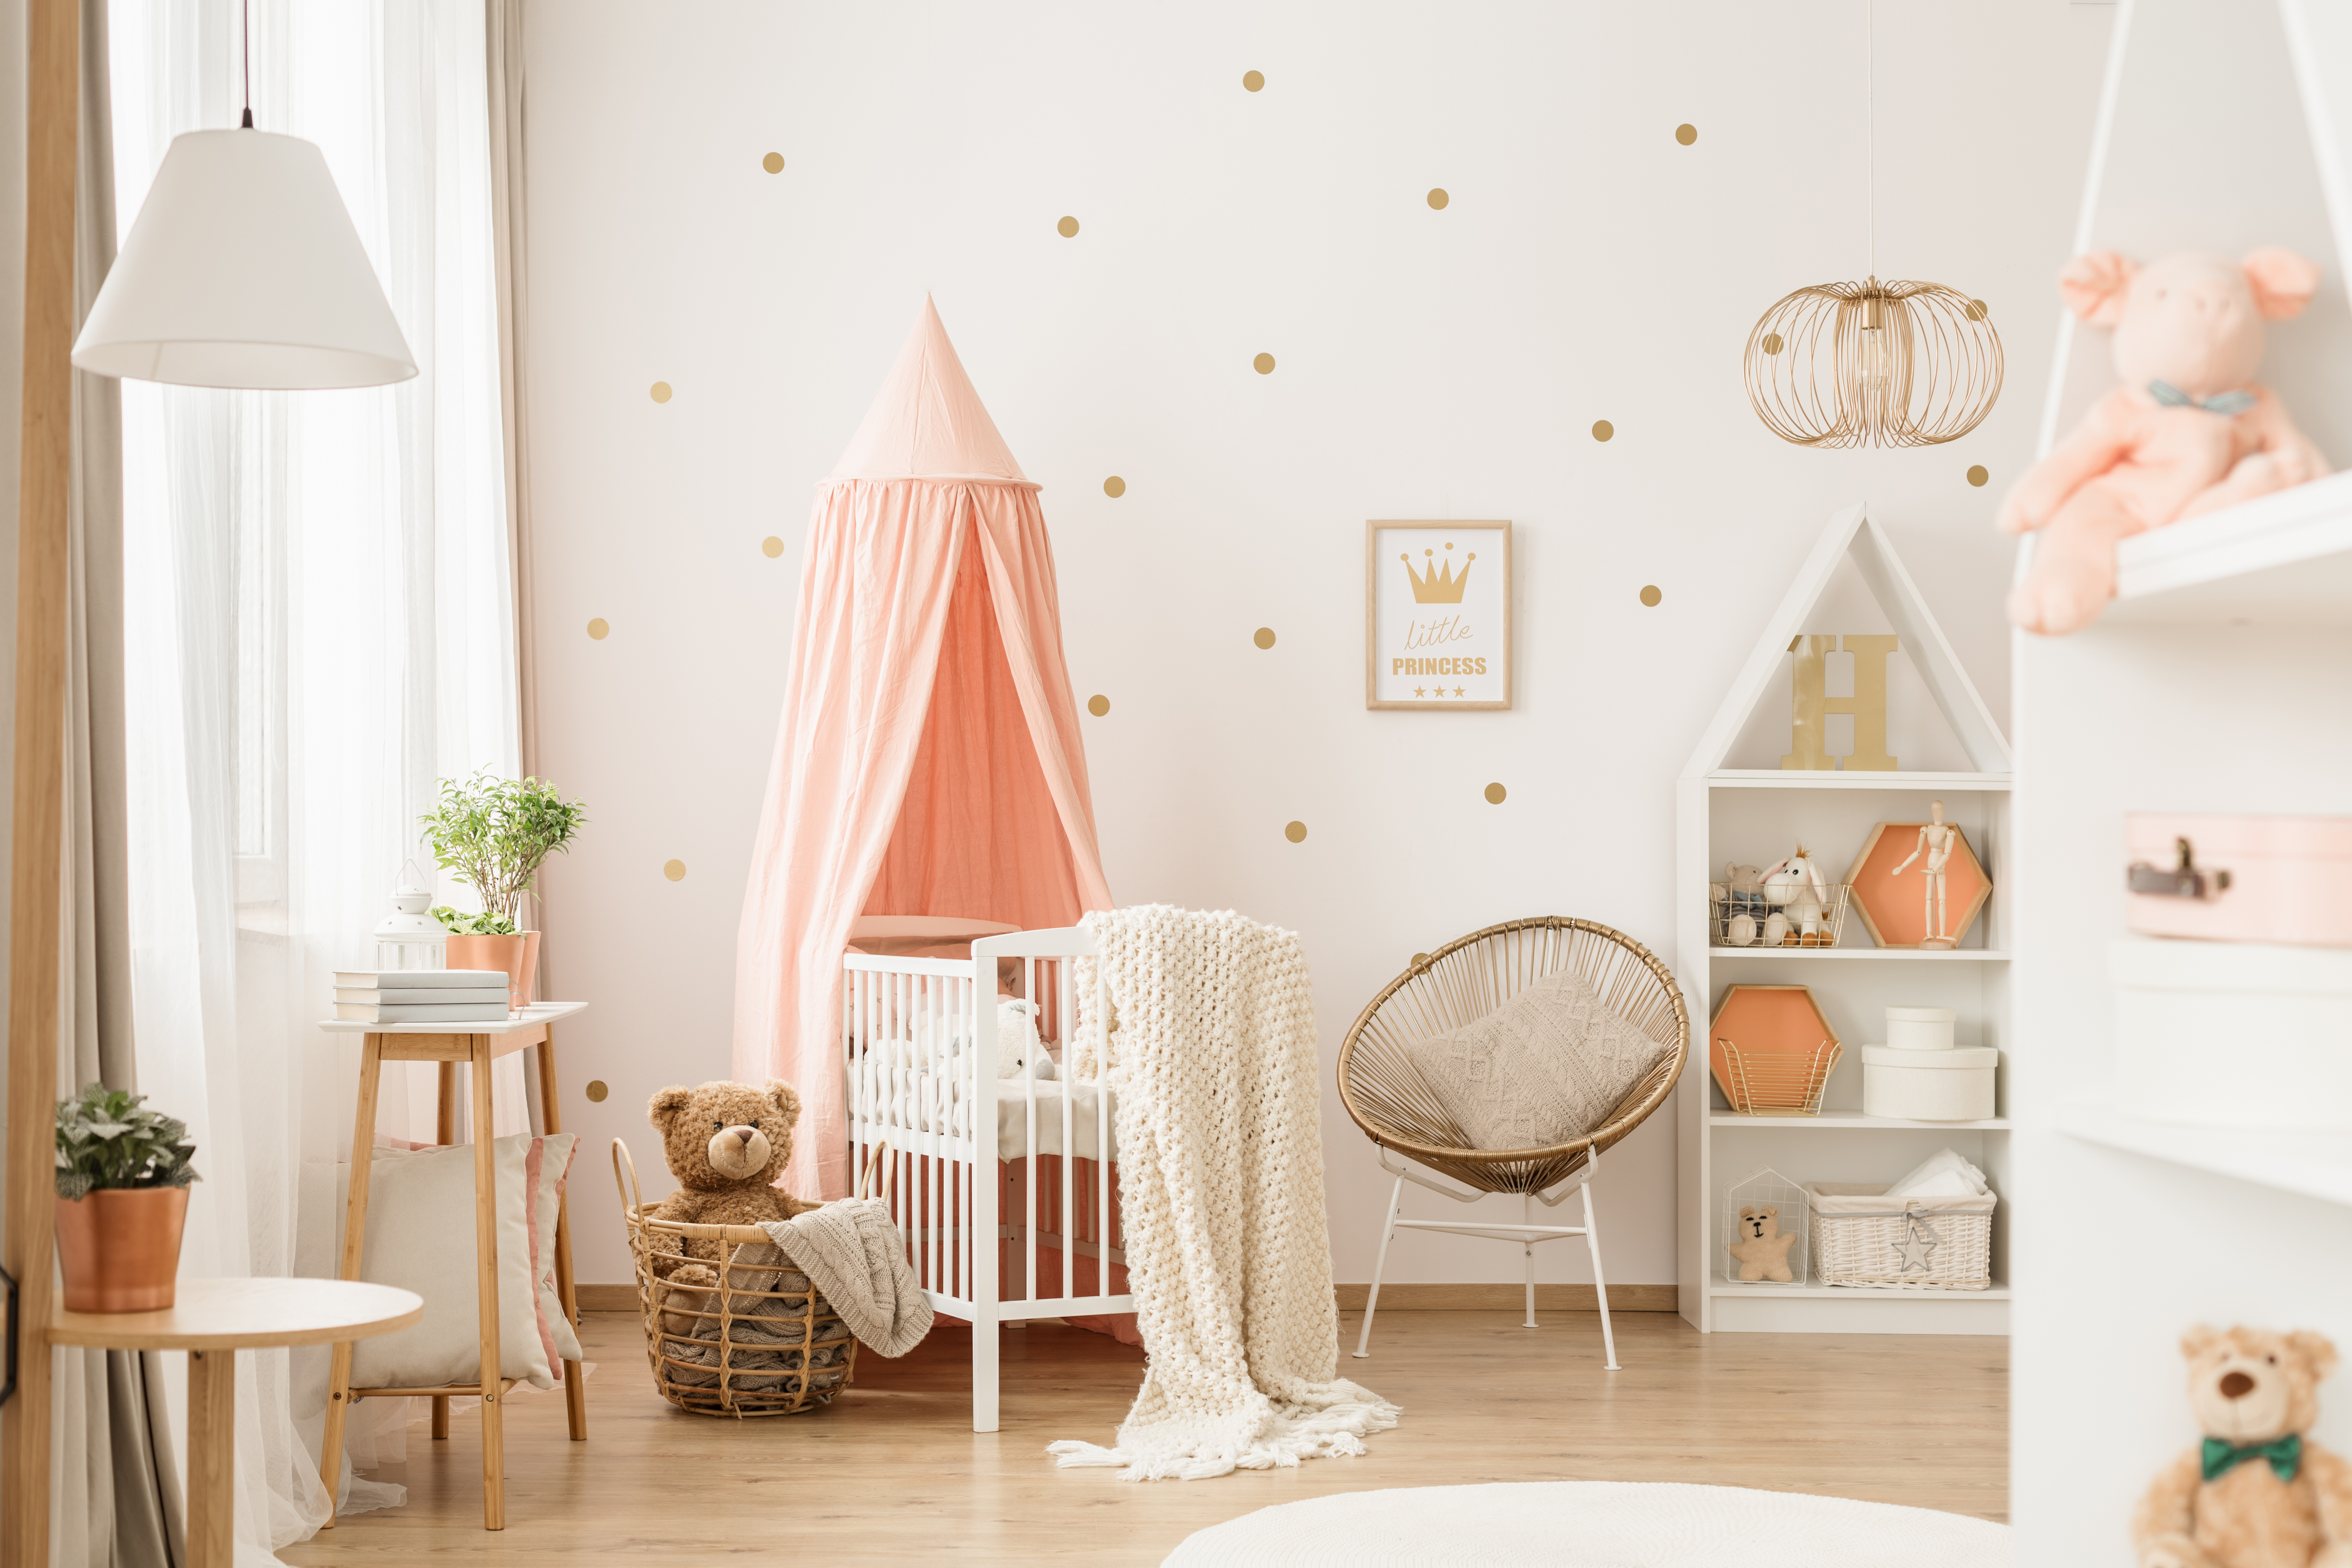 Gold and pink baby's bedroom | Source: Getty Images